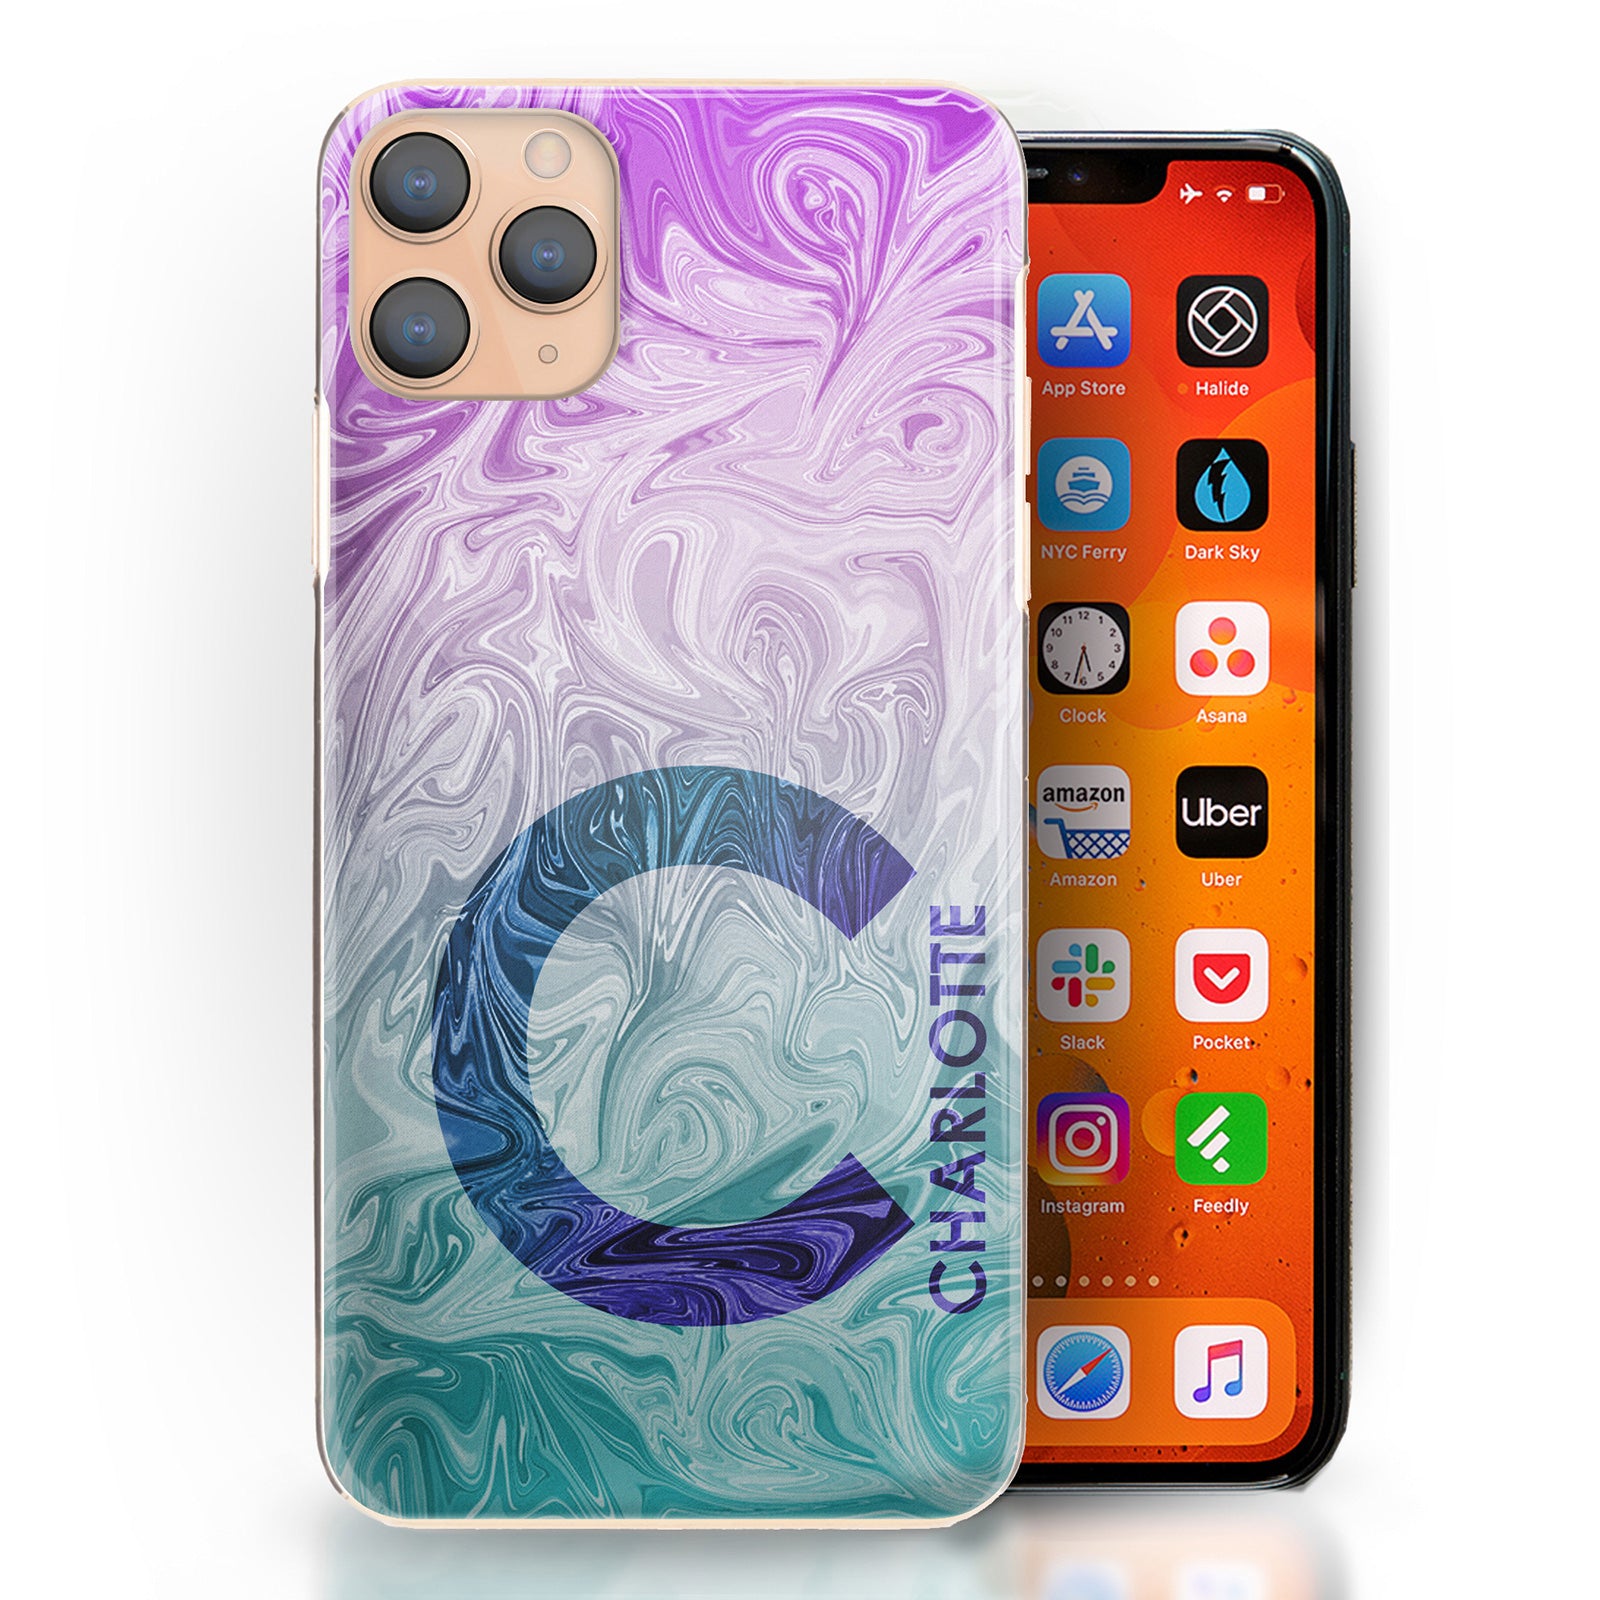 Personalised Nokia Phone Hard Case with Blue Turquoise Gradient Text and Initial on Purple Cyan Gradient Swirled Marble